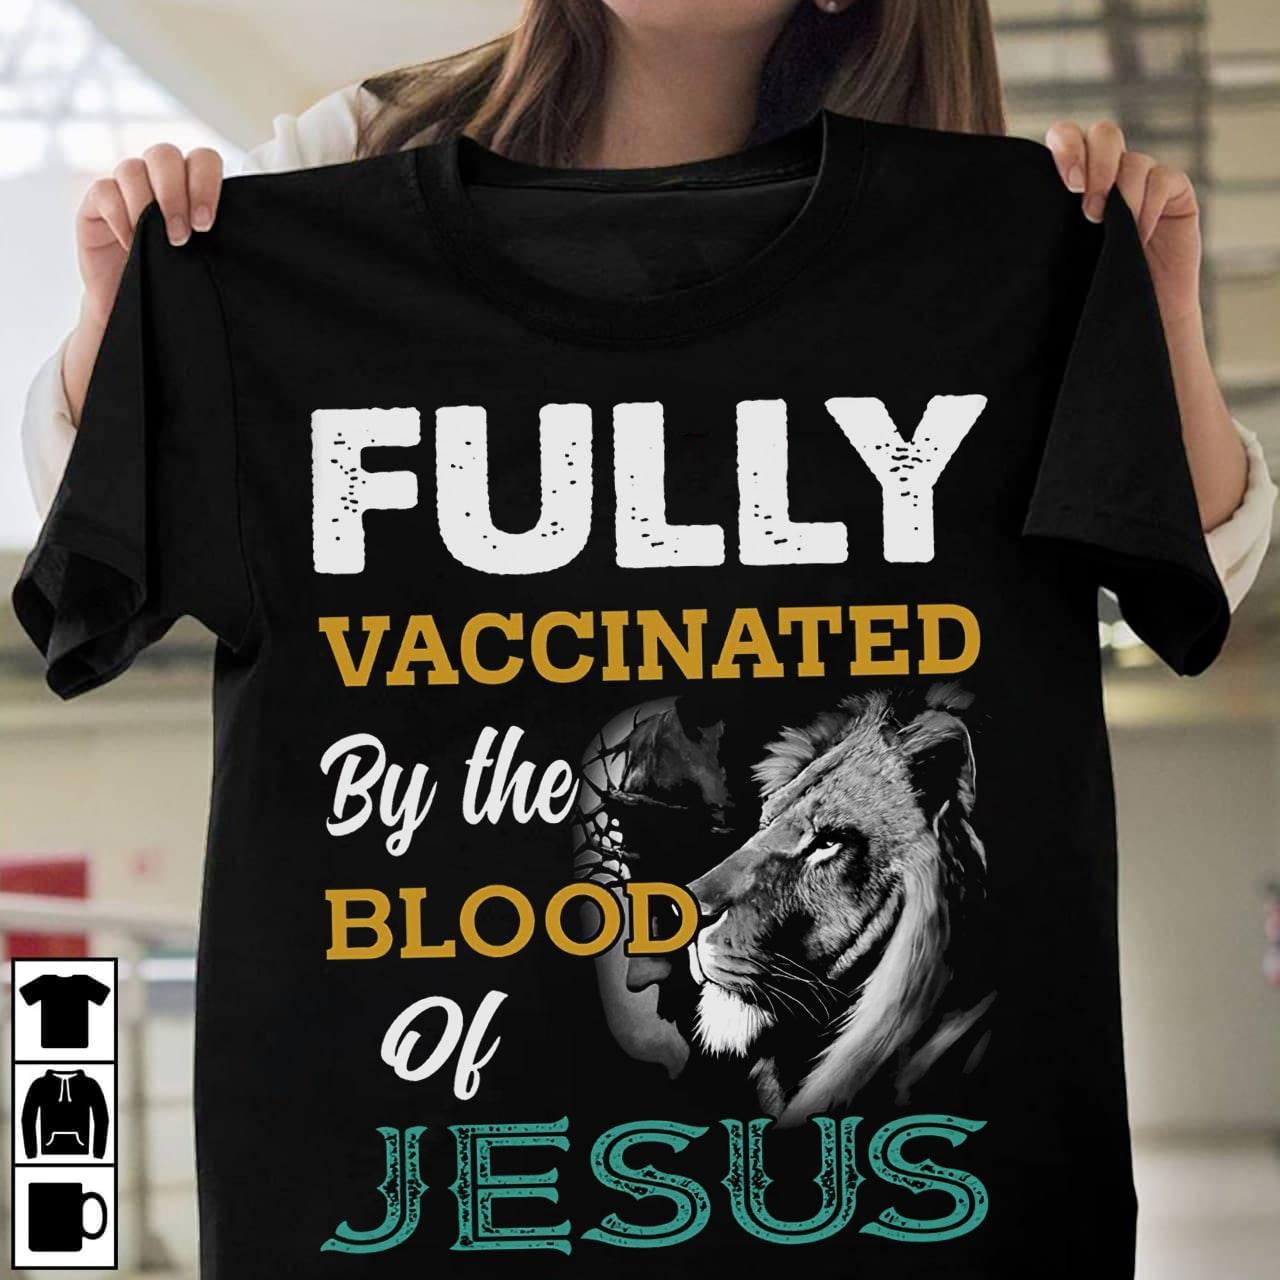 Fully vaccinated by the blood of Jesus - Jesus and lion, Believe in God